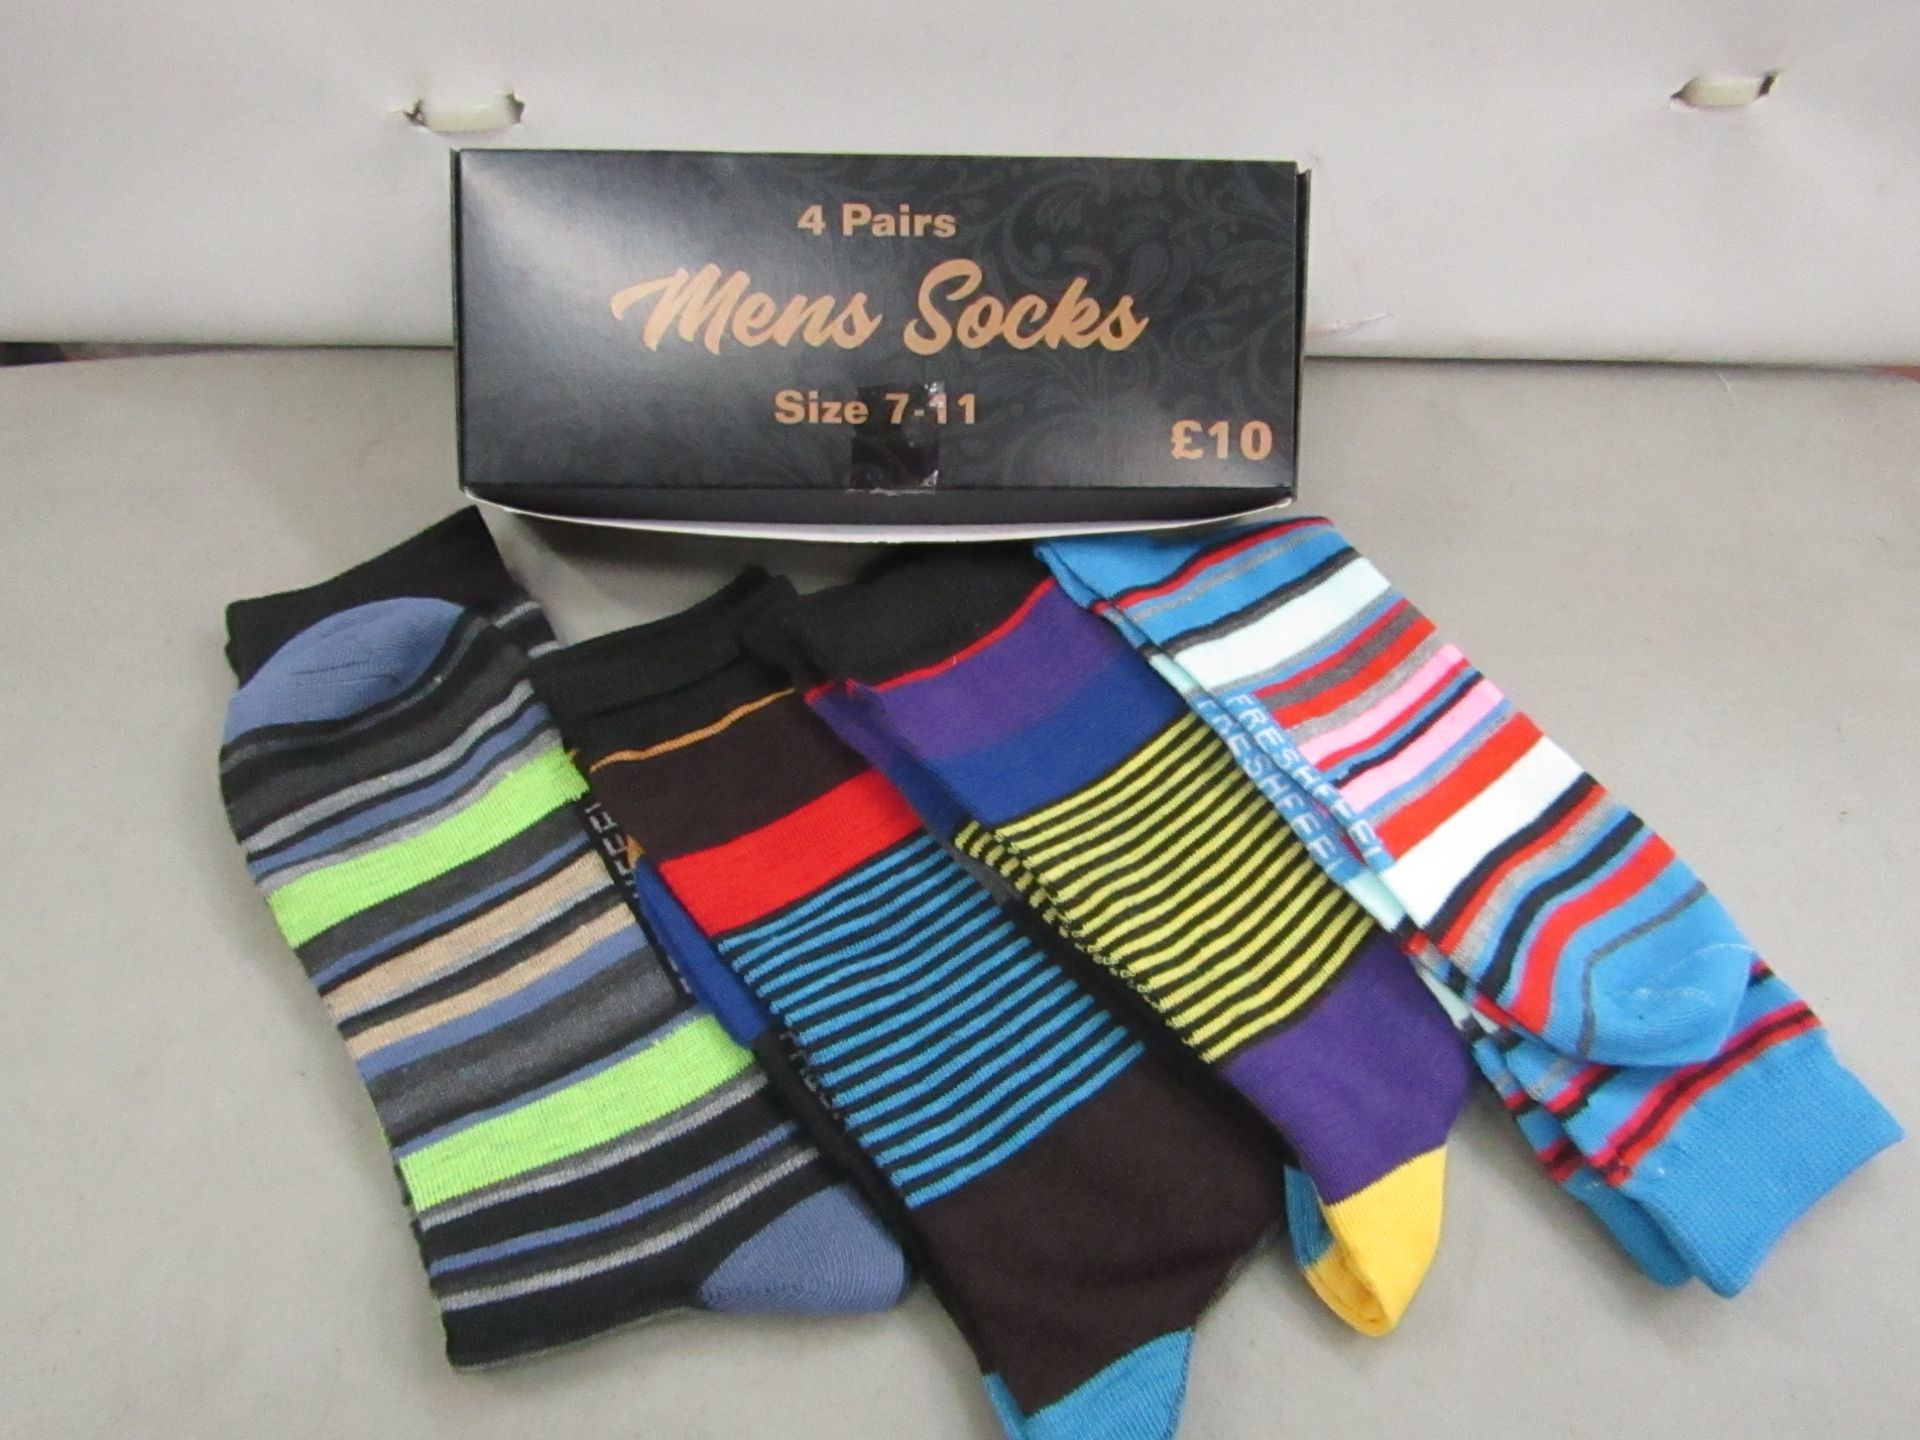 4 X Pairs of Mens Socks size 7-11 new & boxed,( please note the colour & design may vary from